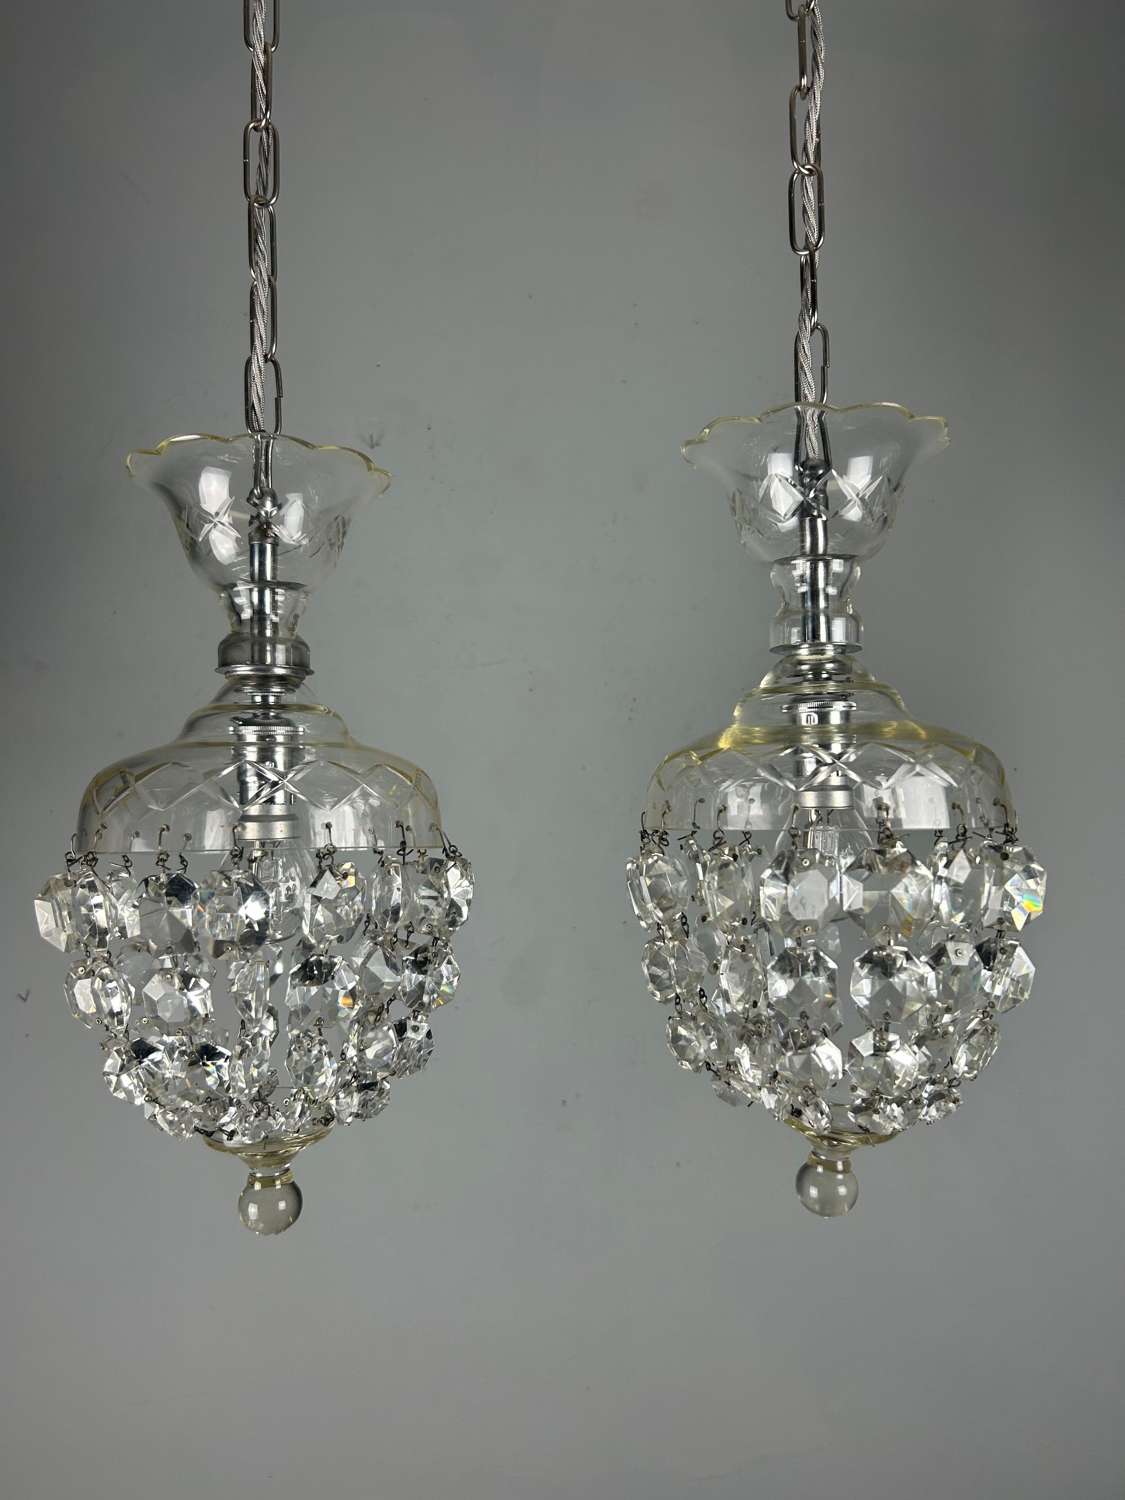 Pair Of Lustre Chandelier Ceiling Lights, Rewired